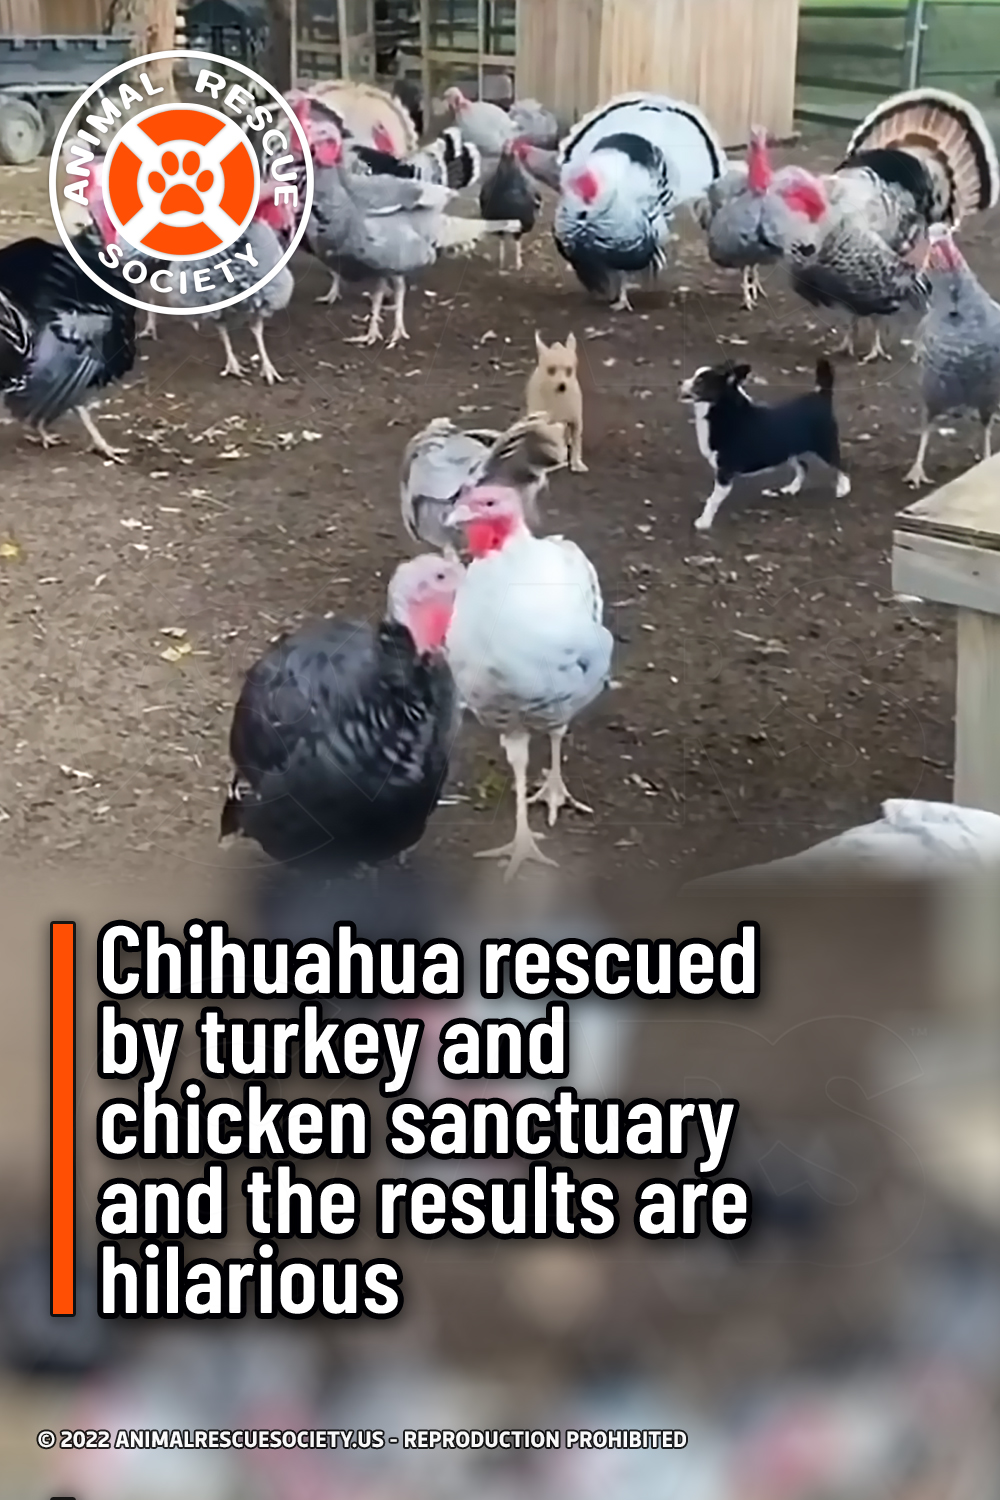 Chihuahua rescued by turkey and chicken sanctuary and the results are hilarious